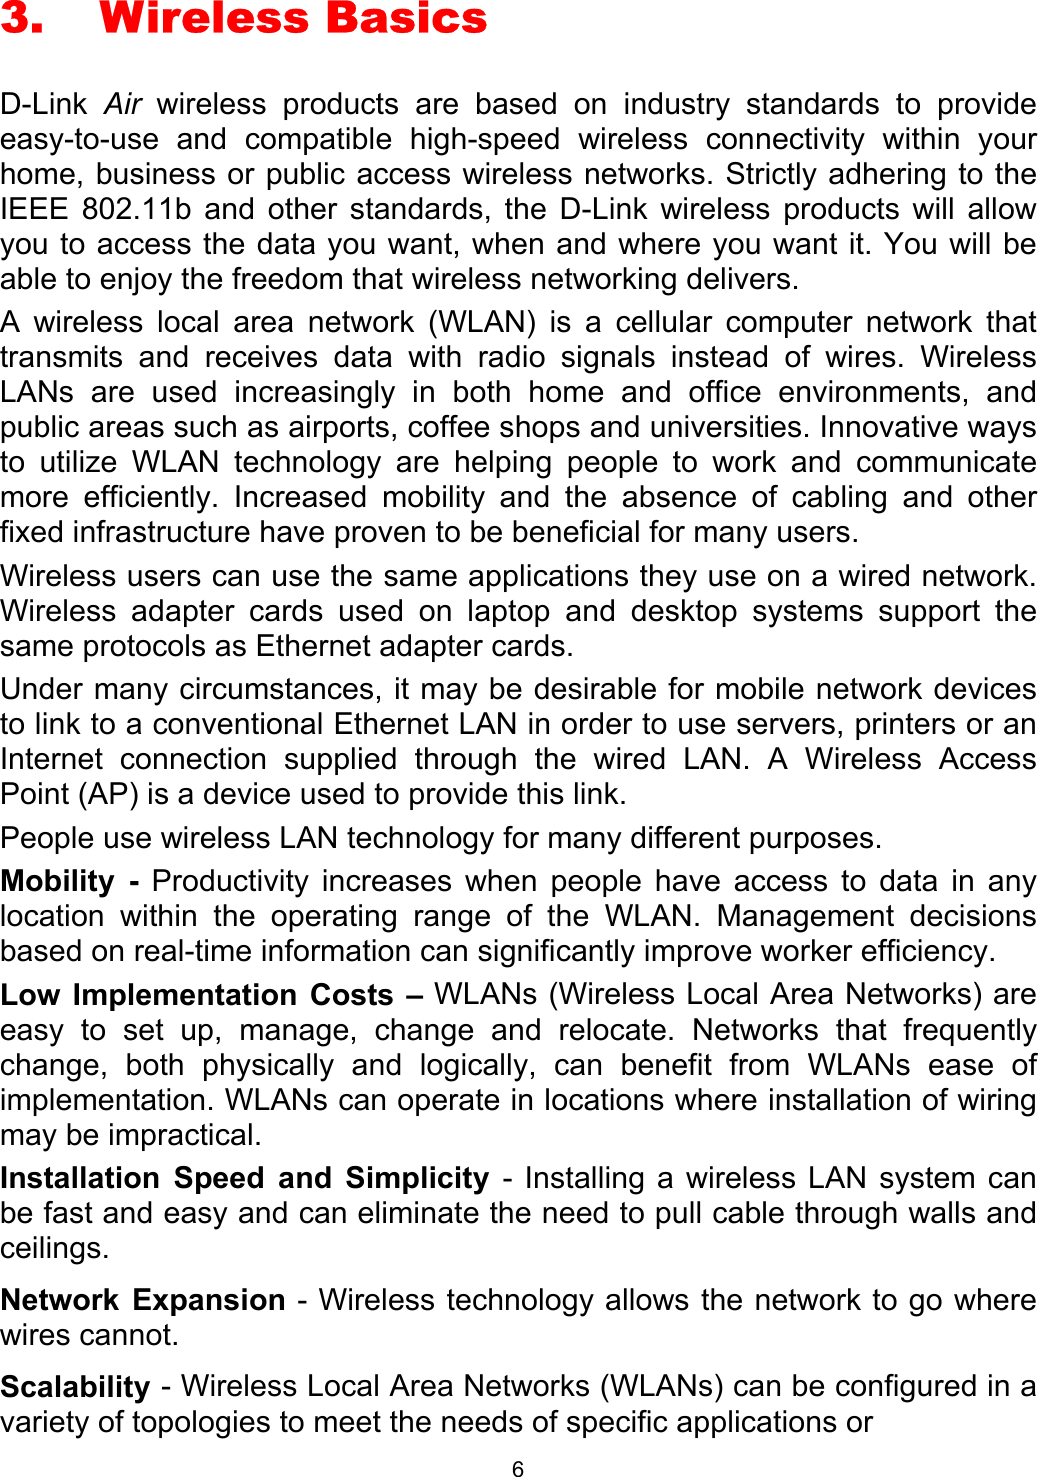  63. Wireless Basics D-Link  Air wireless products are based on industry standards to provide easy-to-use and compatible high-speed wireless connectivity within your home, business or public access wireless networks. Strictly adhering to the IEEE 802.11b and other standards, the D-Link wireless products will allow you to access the data you want, when and where you want it. You will be able to enjoy the freedom that wireless networking delivers. A wireless local area network (WLAN) is a cellular computer network that transmits and receives data with radio signals instead of wires. Wireless LANs are used increasingly in both home and office environments, and public areas such as airports, coffee shops and universities. Innovative ways to utilize WLAN technology are helping people to work and communicate more efficiently. Increased mobility and the absence of cabling and other fixed infrastructure have proven to be beneficial for many users. Wireless users can use the same applications they use on a wired network.  Wireless adapter cards used on laptop and desktop systems support the same protocols as Ethernet adapter cards.  Under many circumstances, it may be desirable for mobile network devices to link to a conventional Ethernet LAN in order to use servers, printers or an Internet connection supplied through the wired LAN. A Wireless Access Point (AP) is a device used to provide this link. People use wireless LAN technology for many different purposes.  Mobility - Productivity increases when people have access to data in any location within the operating range of the WLAN. Management decisions based on real-time information can significantly improve worker efficiency. Low Implementation Costs – WLANs (Wireless Local Area Networks) are easy to set up, manage, change and relocate. Networks that frequently change, both physically and logically, can benefit from WLANs ease of implementation. WLANs can operate in locations where installation of wiring may be impractical.  Installation Speed and Simplicity - Installing a wireless LAN system can be fast and easy and can eliminate the need to pull cable through walls and ceilings. Network Expansion - Wireless technology allows the network to go where wires cannot. Scalability - Wireless Local Area Networks (WLANs) can be configured in a variety of topologies to meet the needs of specific applications or  